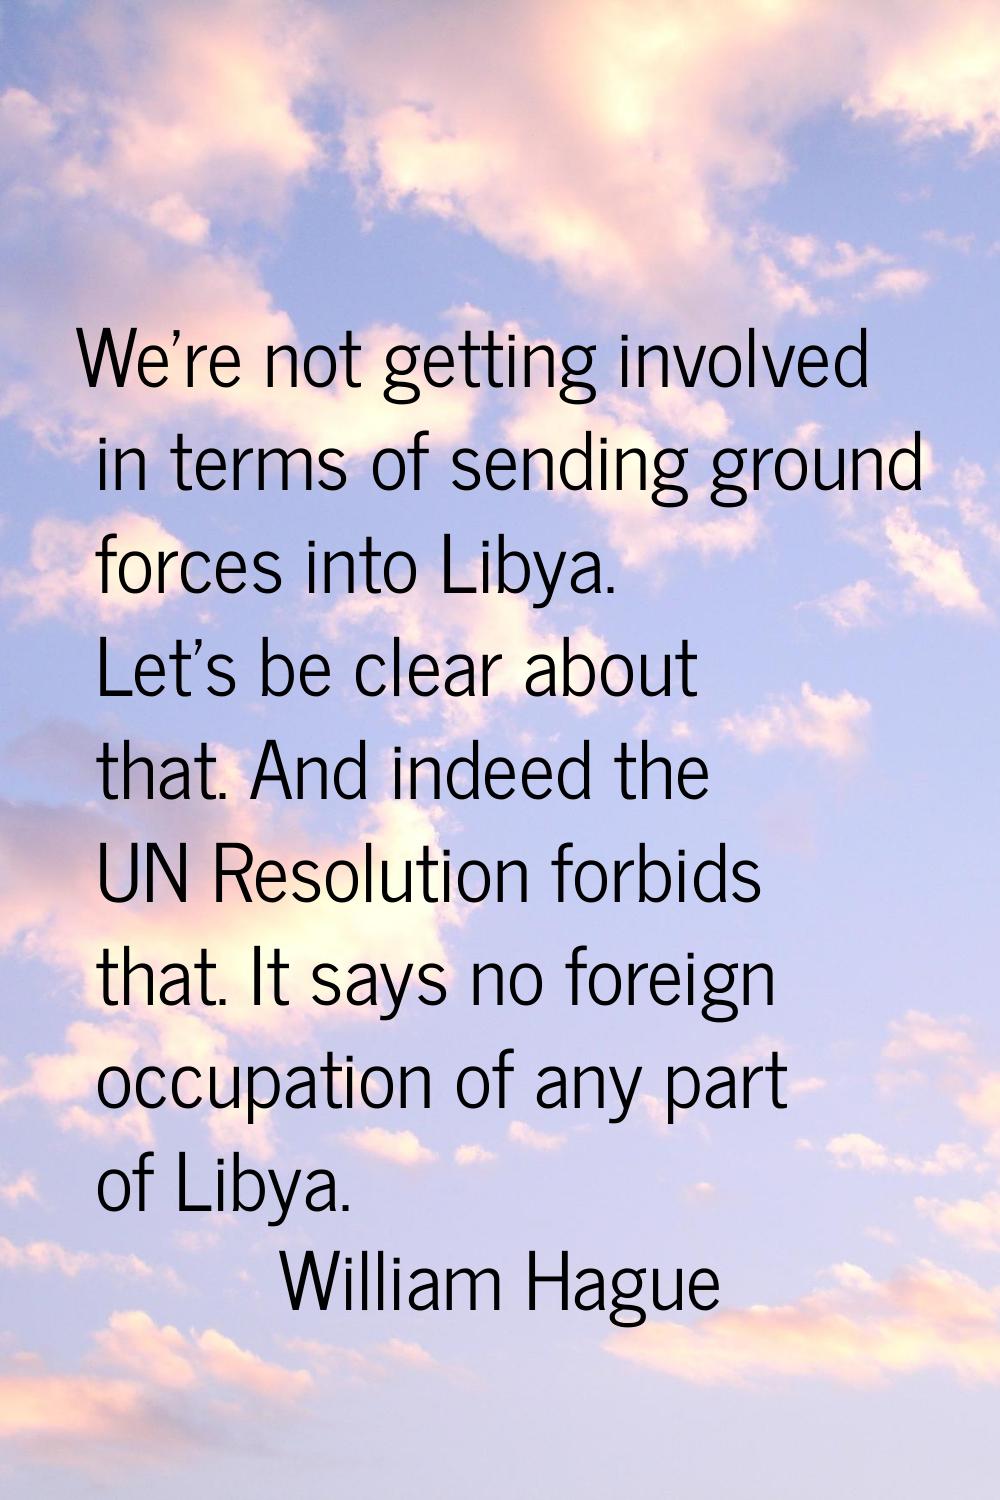 We're not getting involved in terms of sending ground forces into Libya. Let's be clear about that.